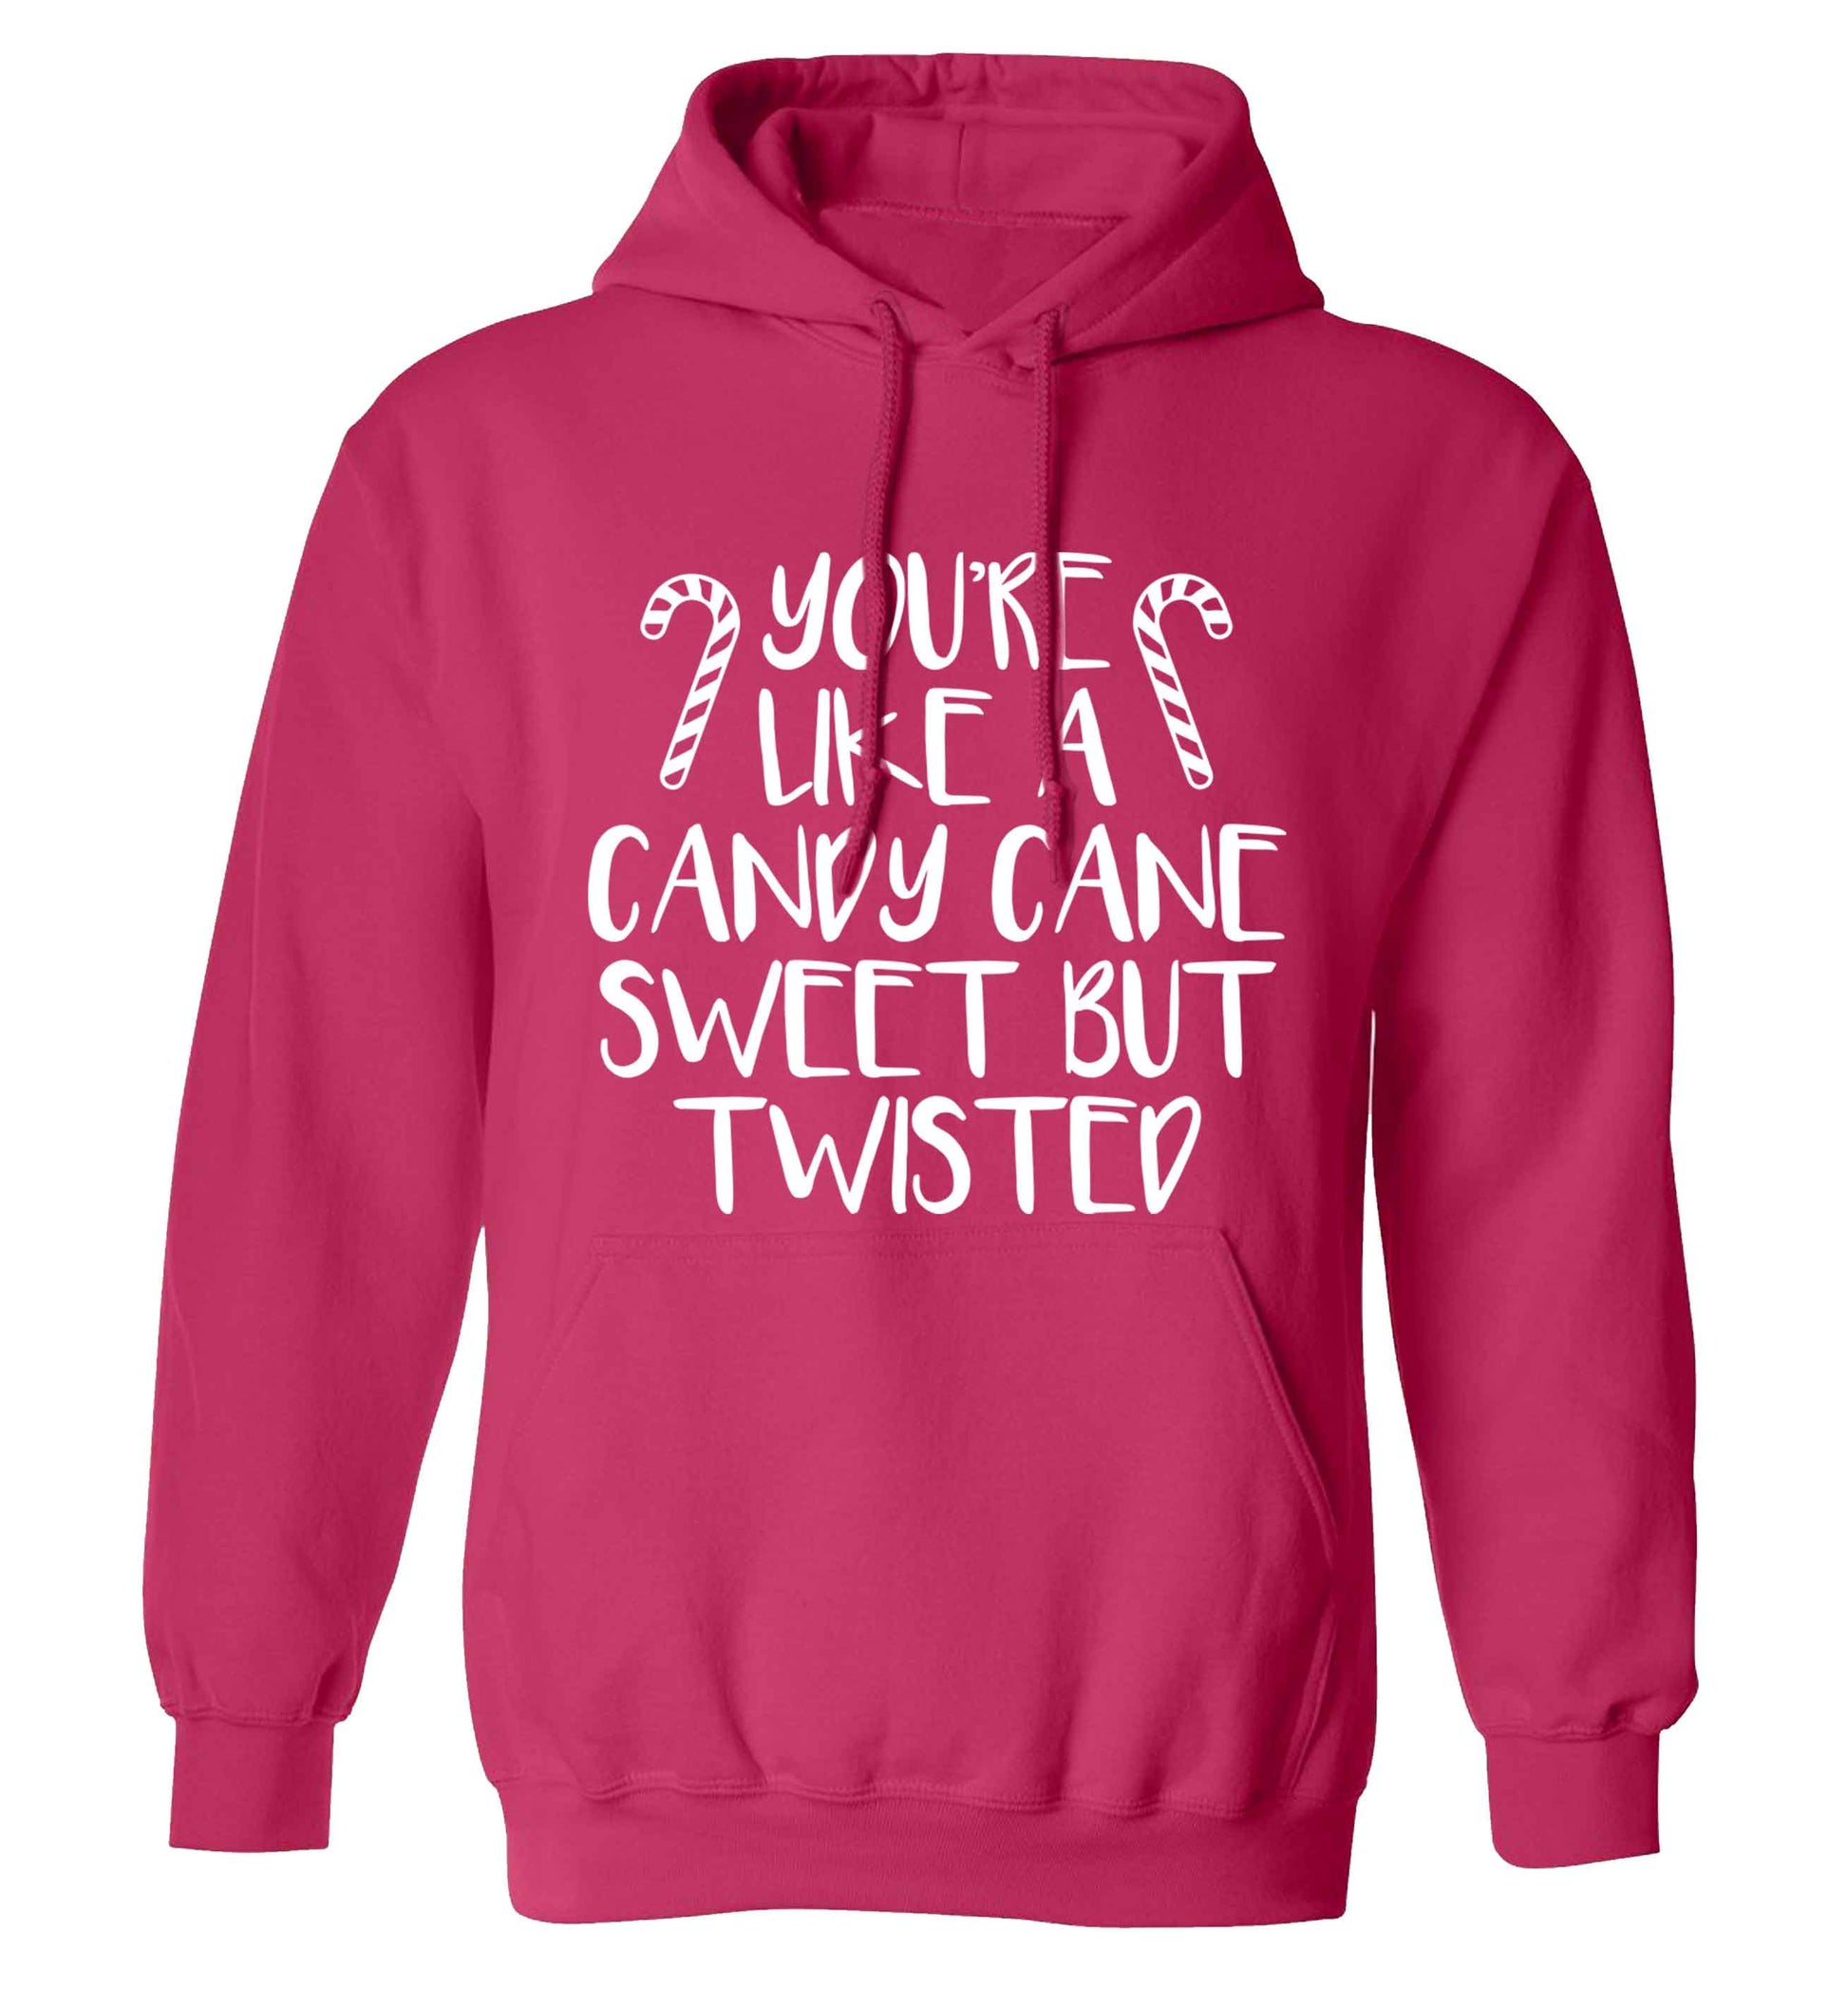 You're like a candy cane sweet but twisted adults unisex pink hoodie 2XL